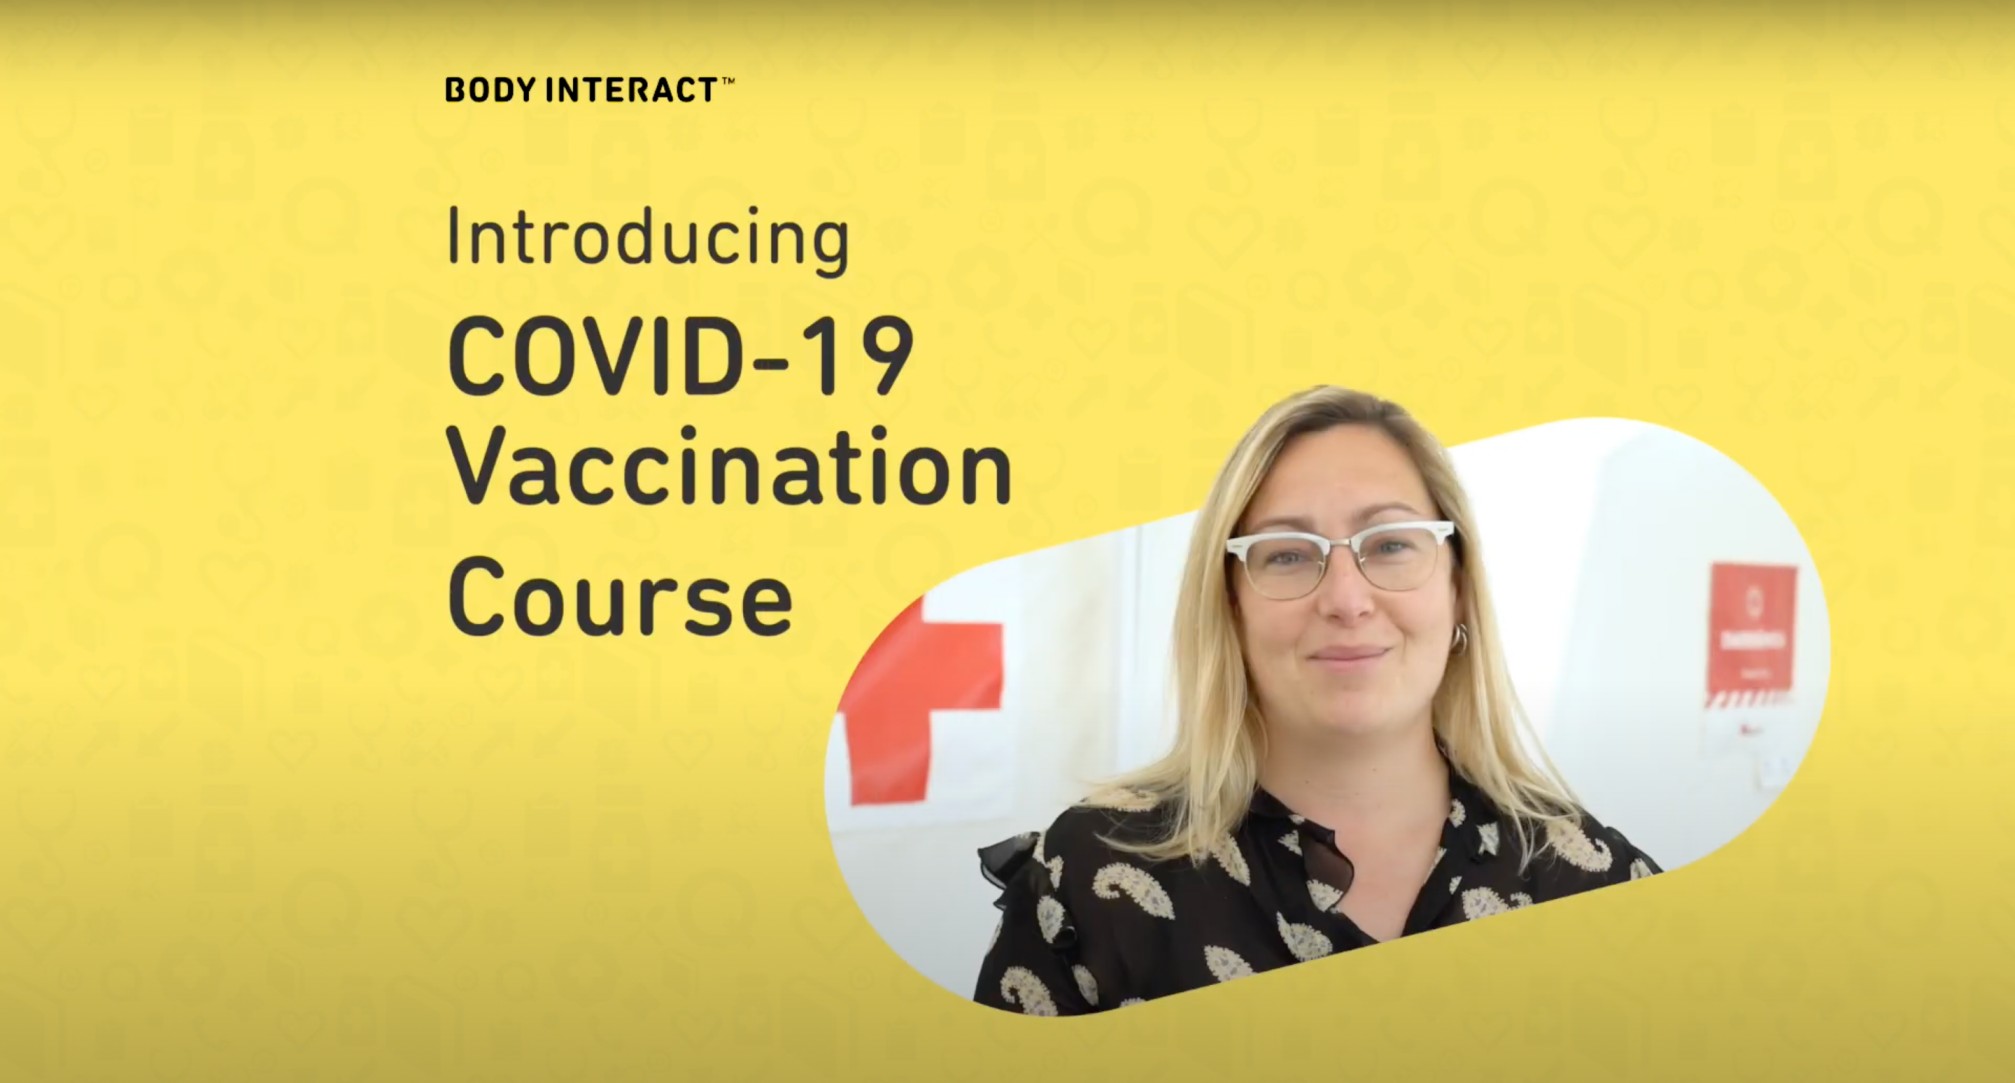 Introducing COVID-19 vaccination course